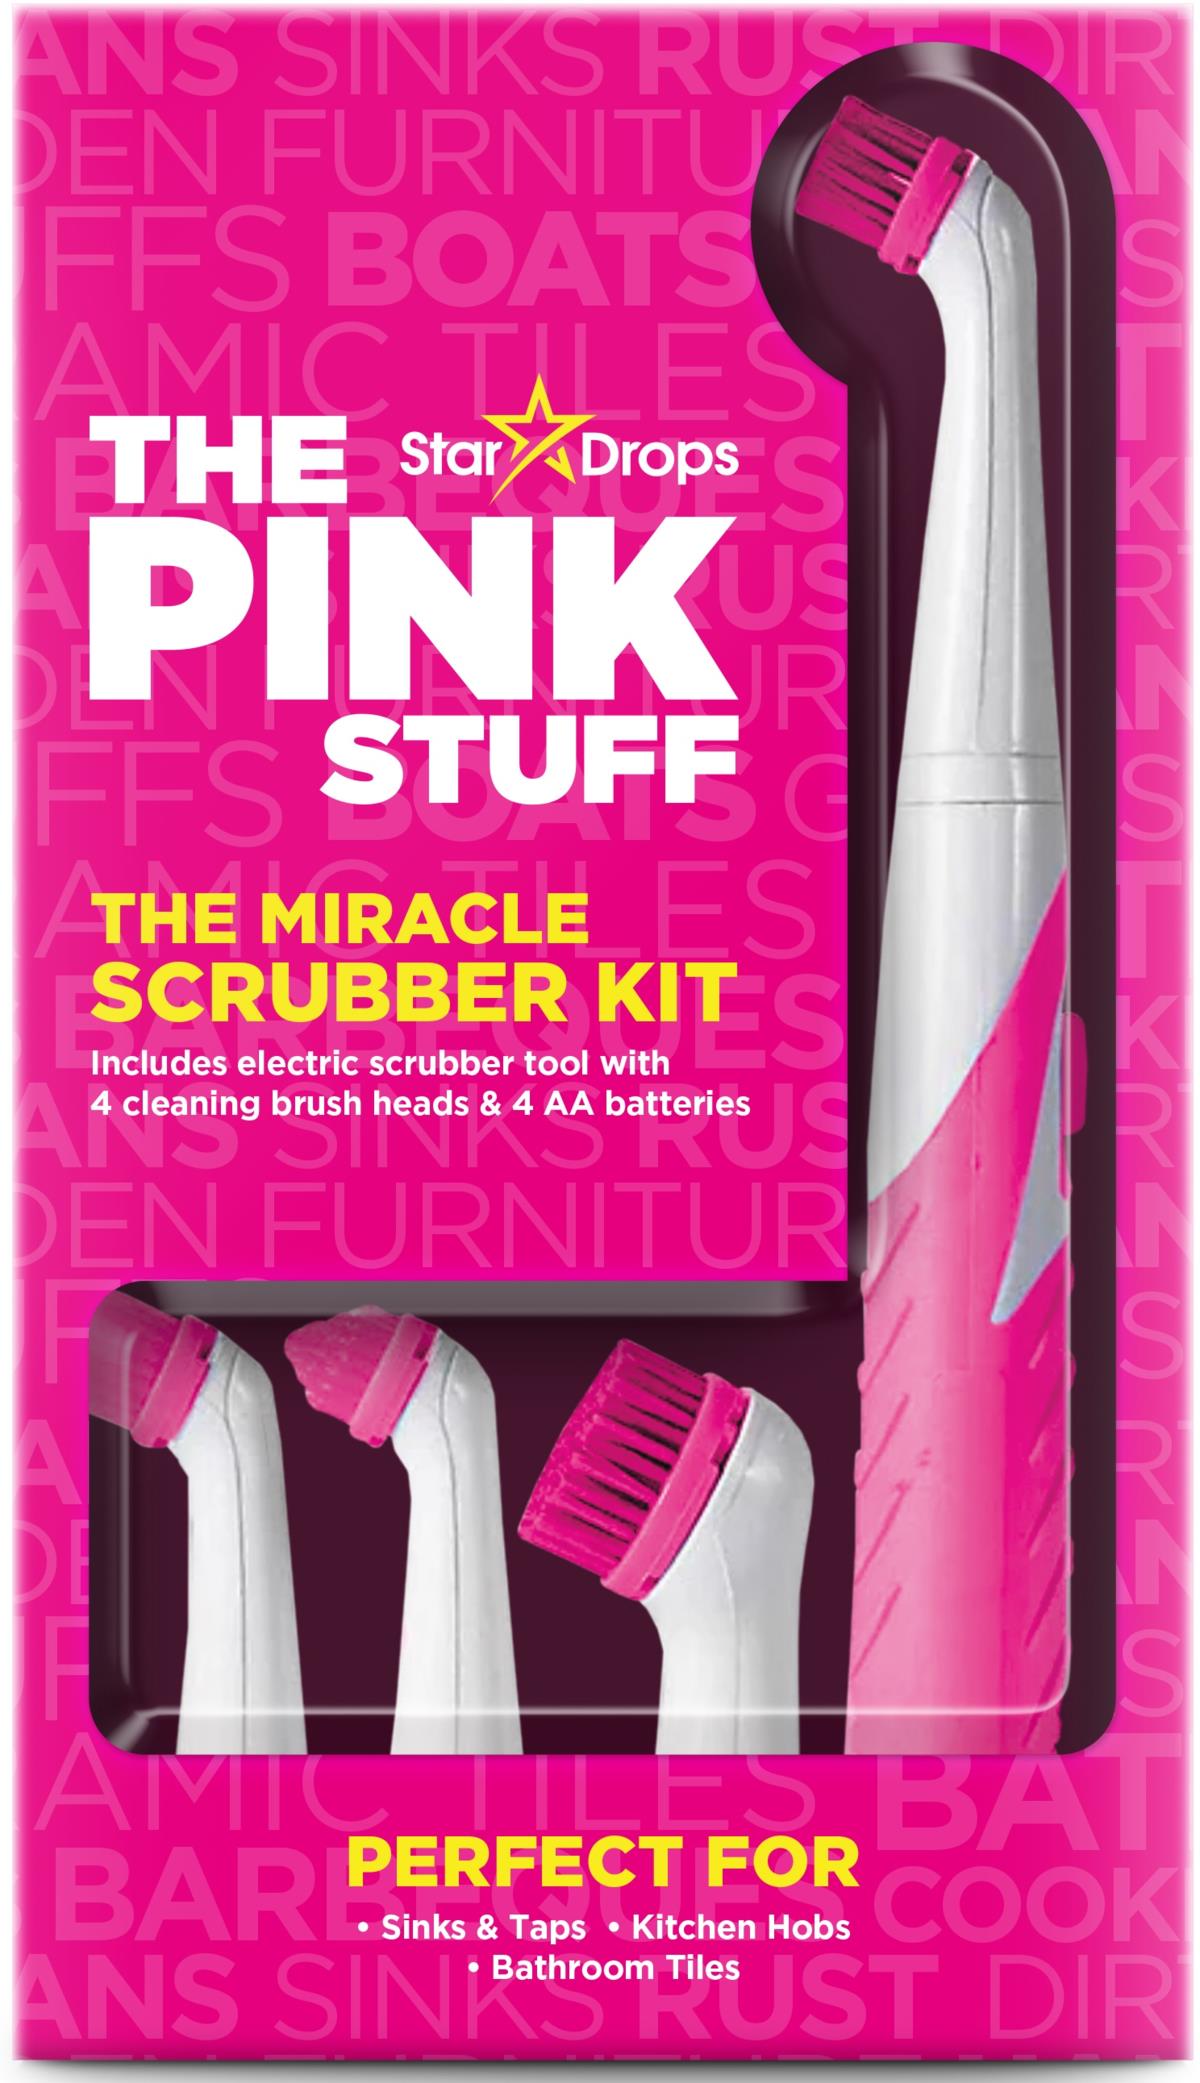 https://lyko.com/globalassets/product-images/the-pink-stuff-sonic-scrubber-kit-3278-120-0000_1.jpg?ref=D469E107D5&w=1200&h=2083&quality=75